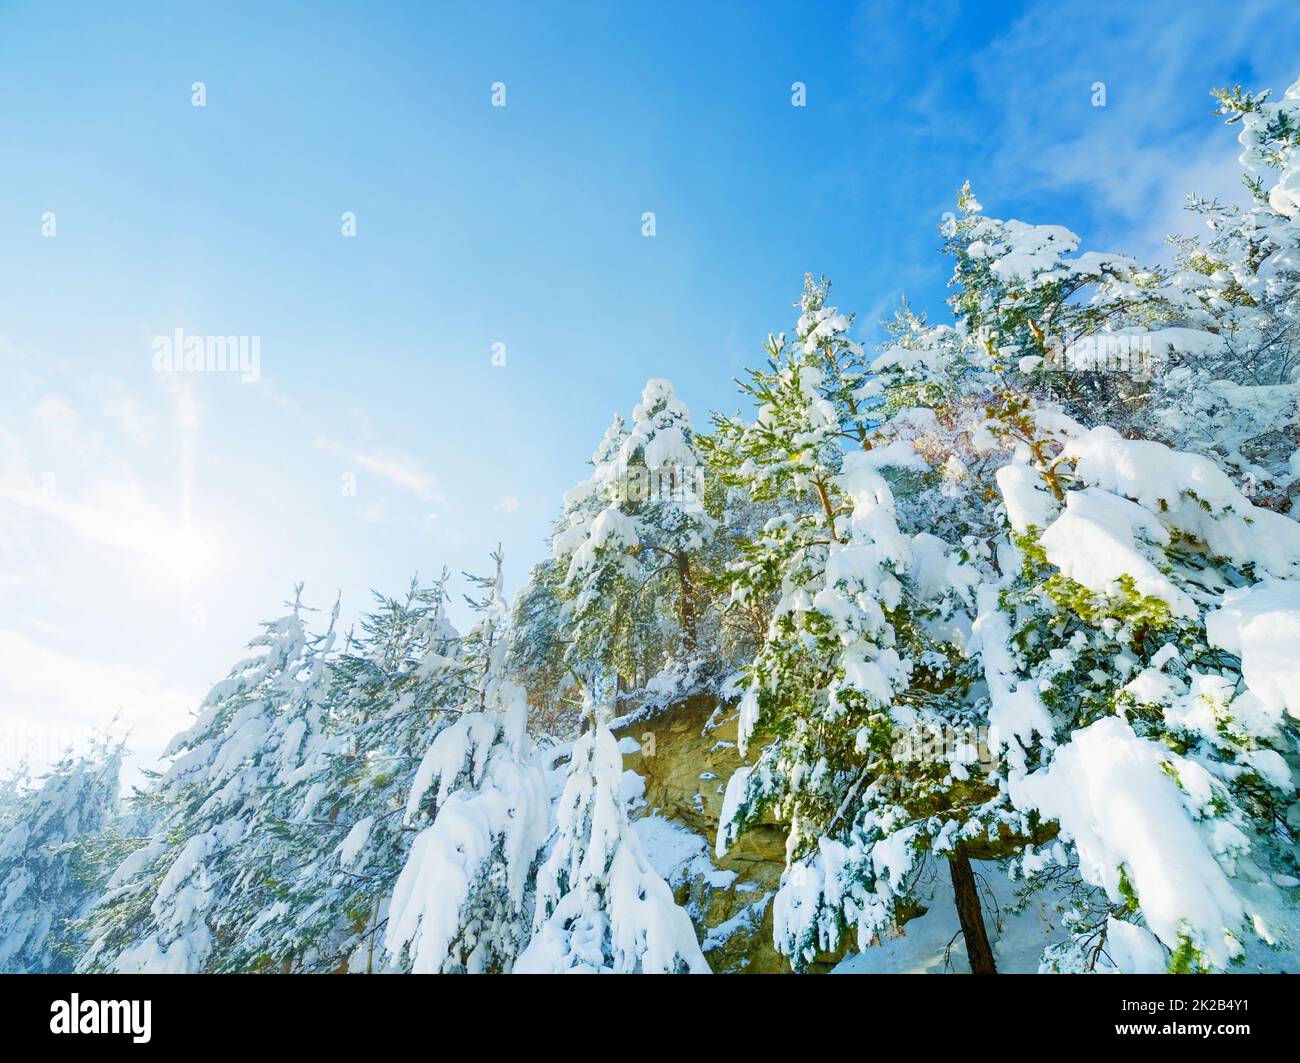 Trees in the winter. Image of a snowy landscape. Stock Photo